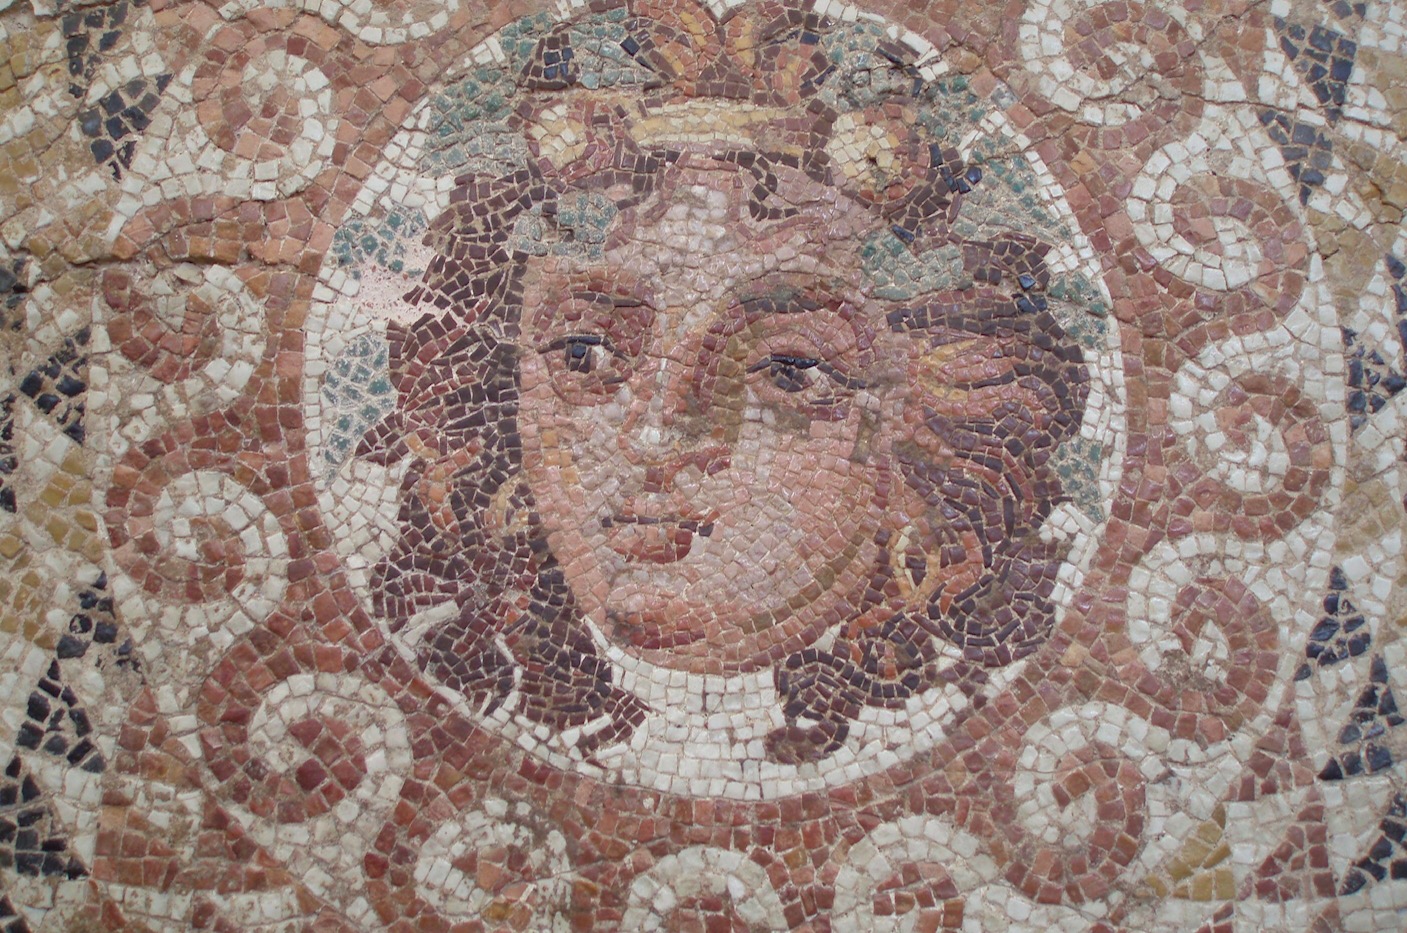 Mosaic floor from Corinth